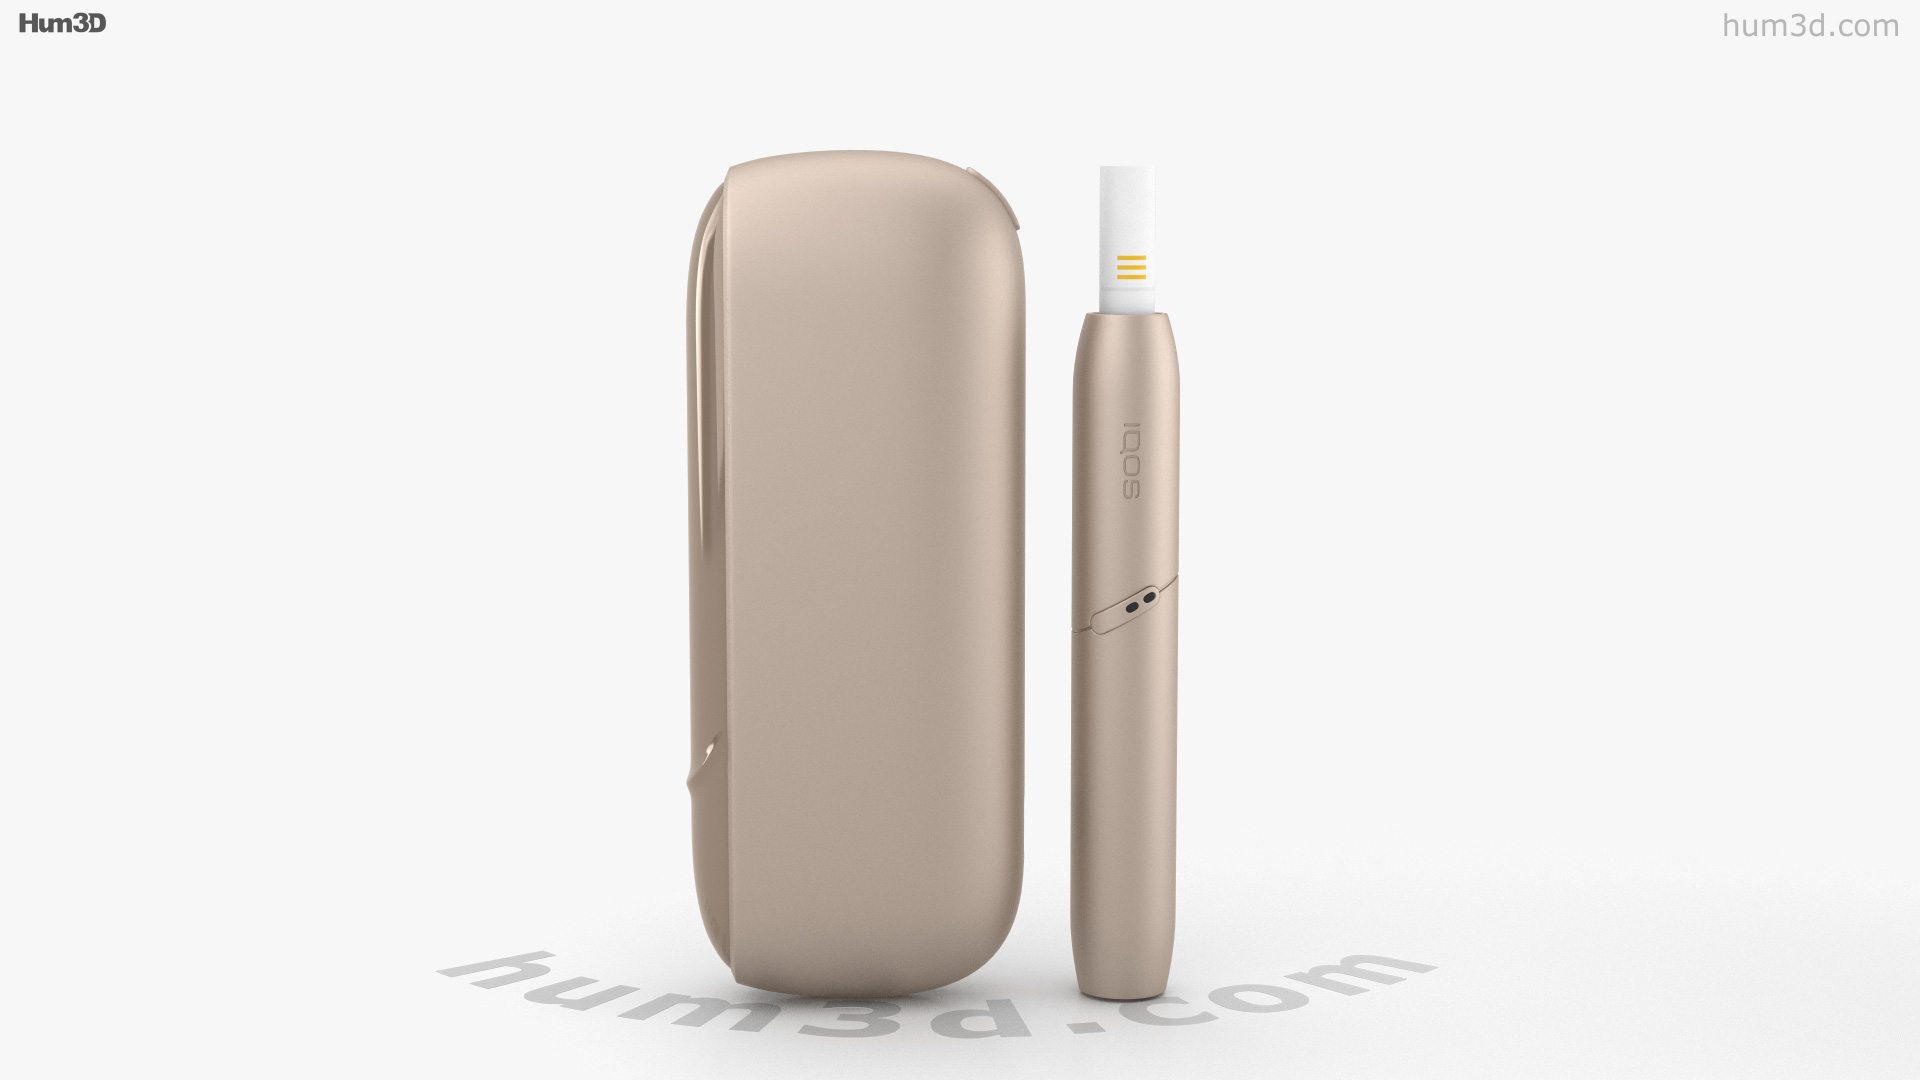 360 view of IQOS 3 Duo Electronic Cigarette 3D model - 3DModels store